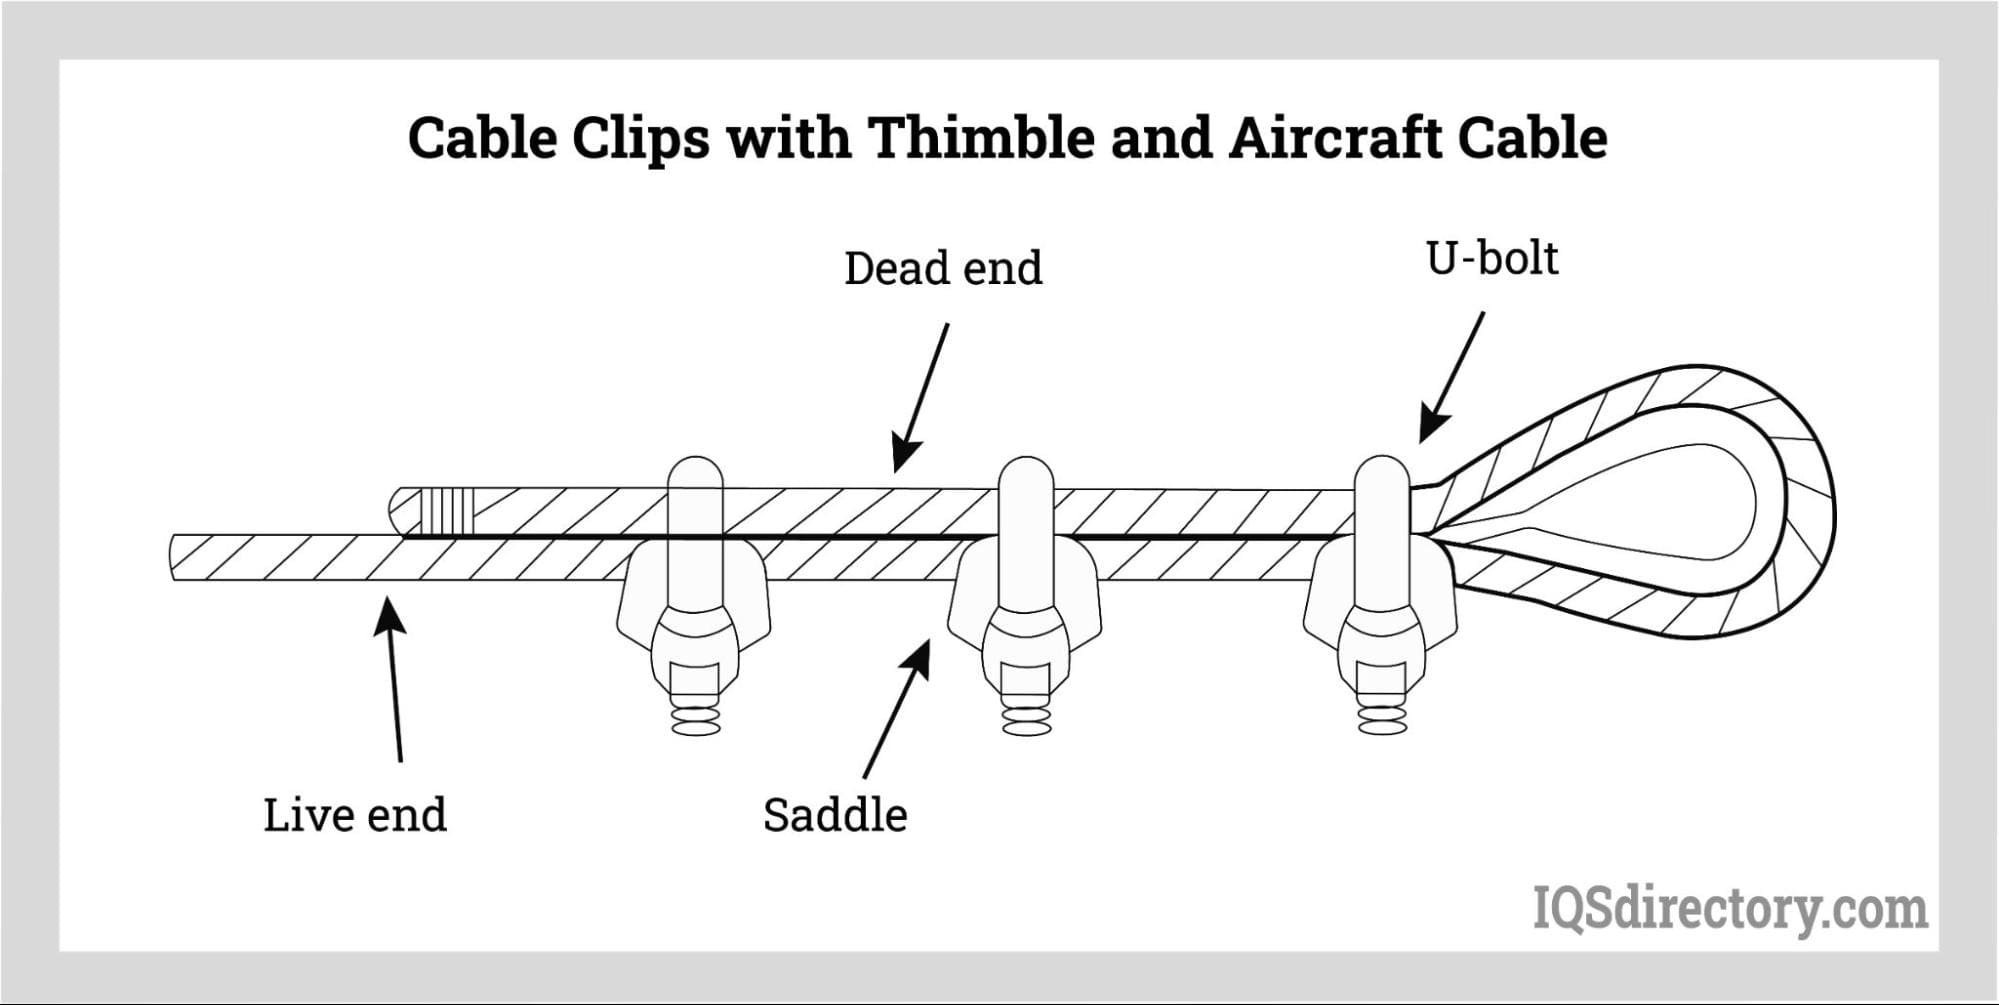 Cable Clips with Thimble and Aircraft Cable